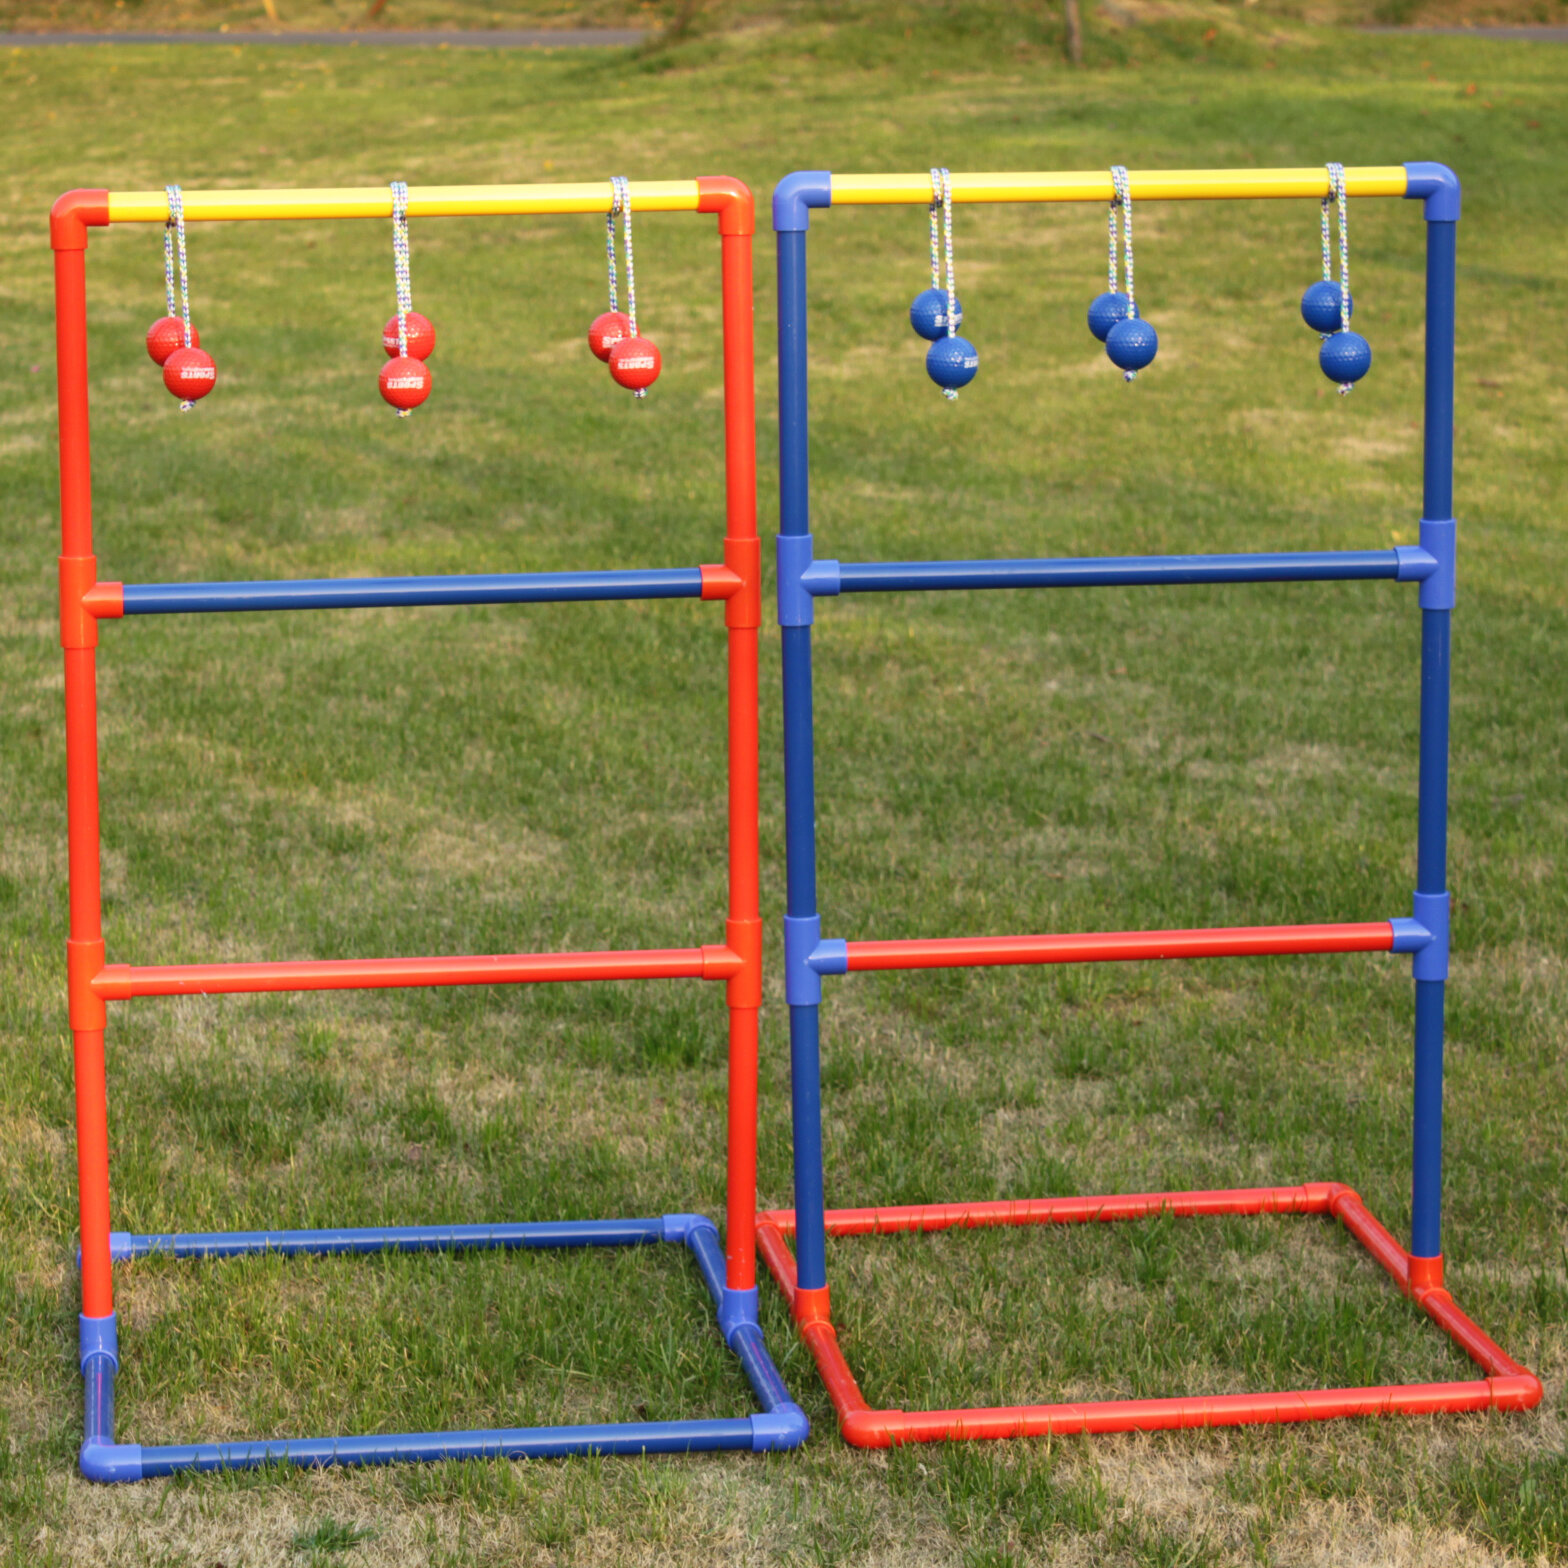 Pssopp Ladder Toss Ball Game Set Portable Ladder Ball Toss Game Set Indoor Outdoor Lawn Game for Adults and Kid 